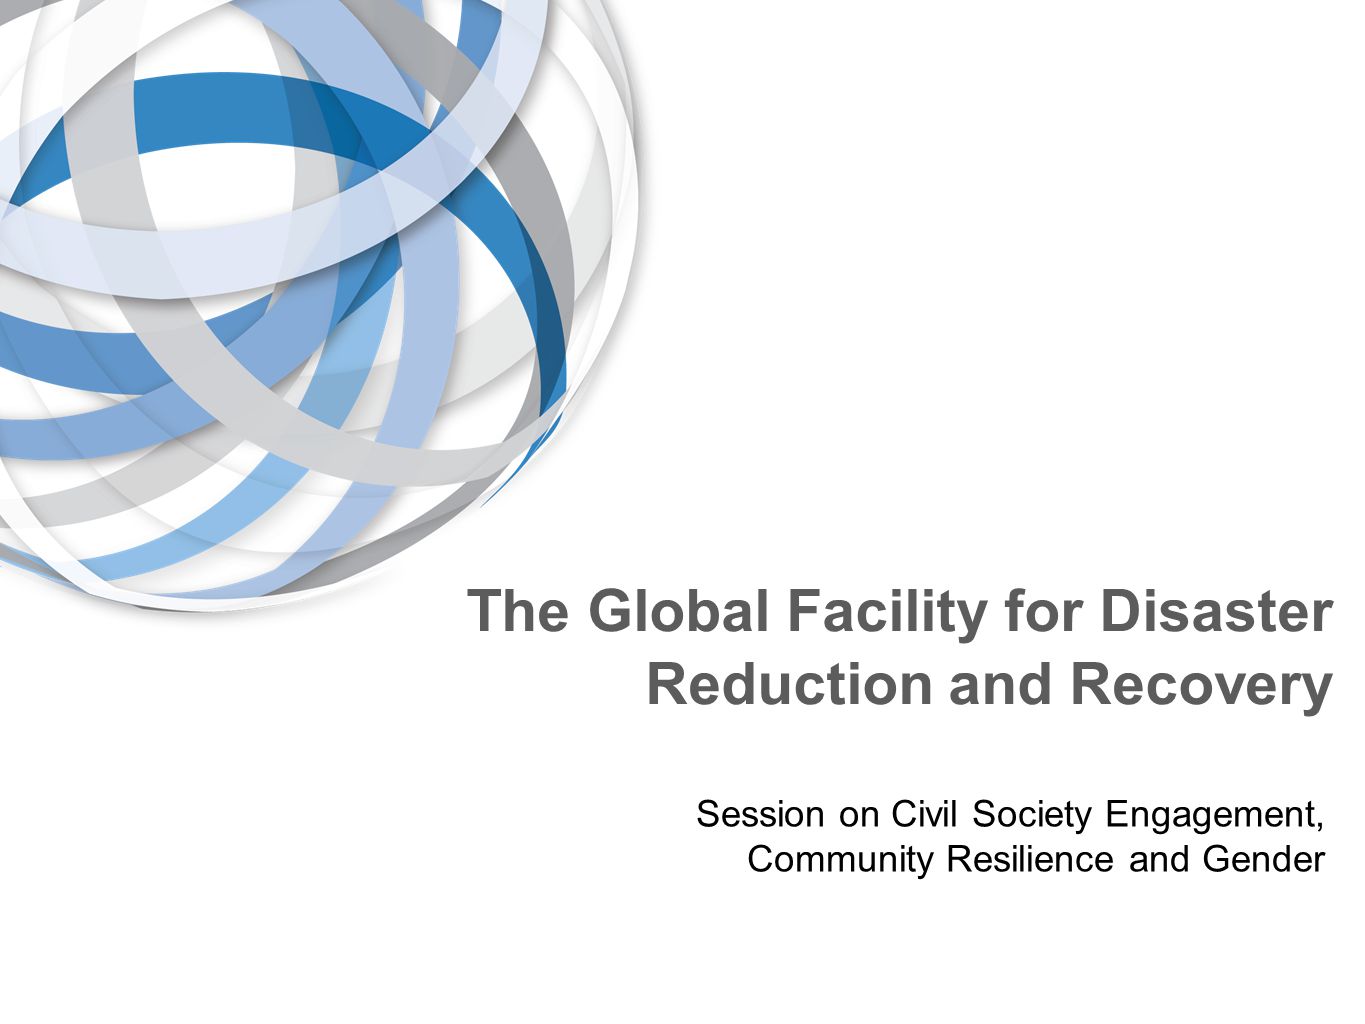 The Global Facility for Disaster Reduction and Recovery Session on Civil Society Engagement, Community Resilience and Gender